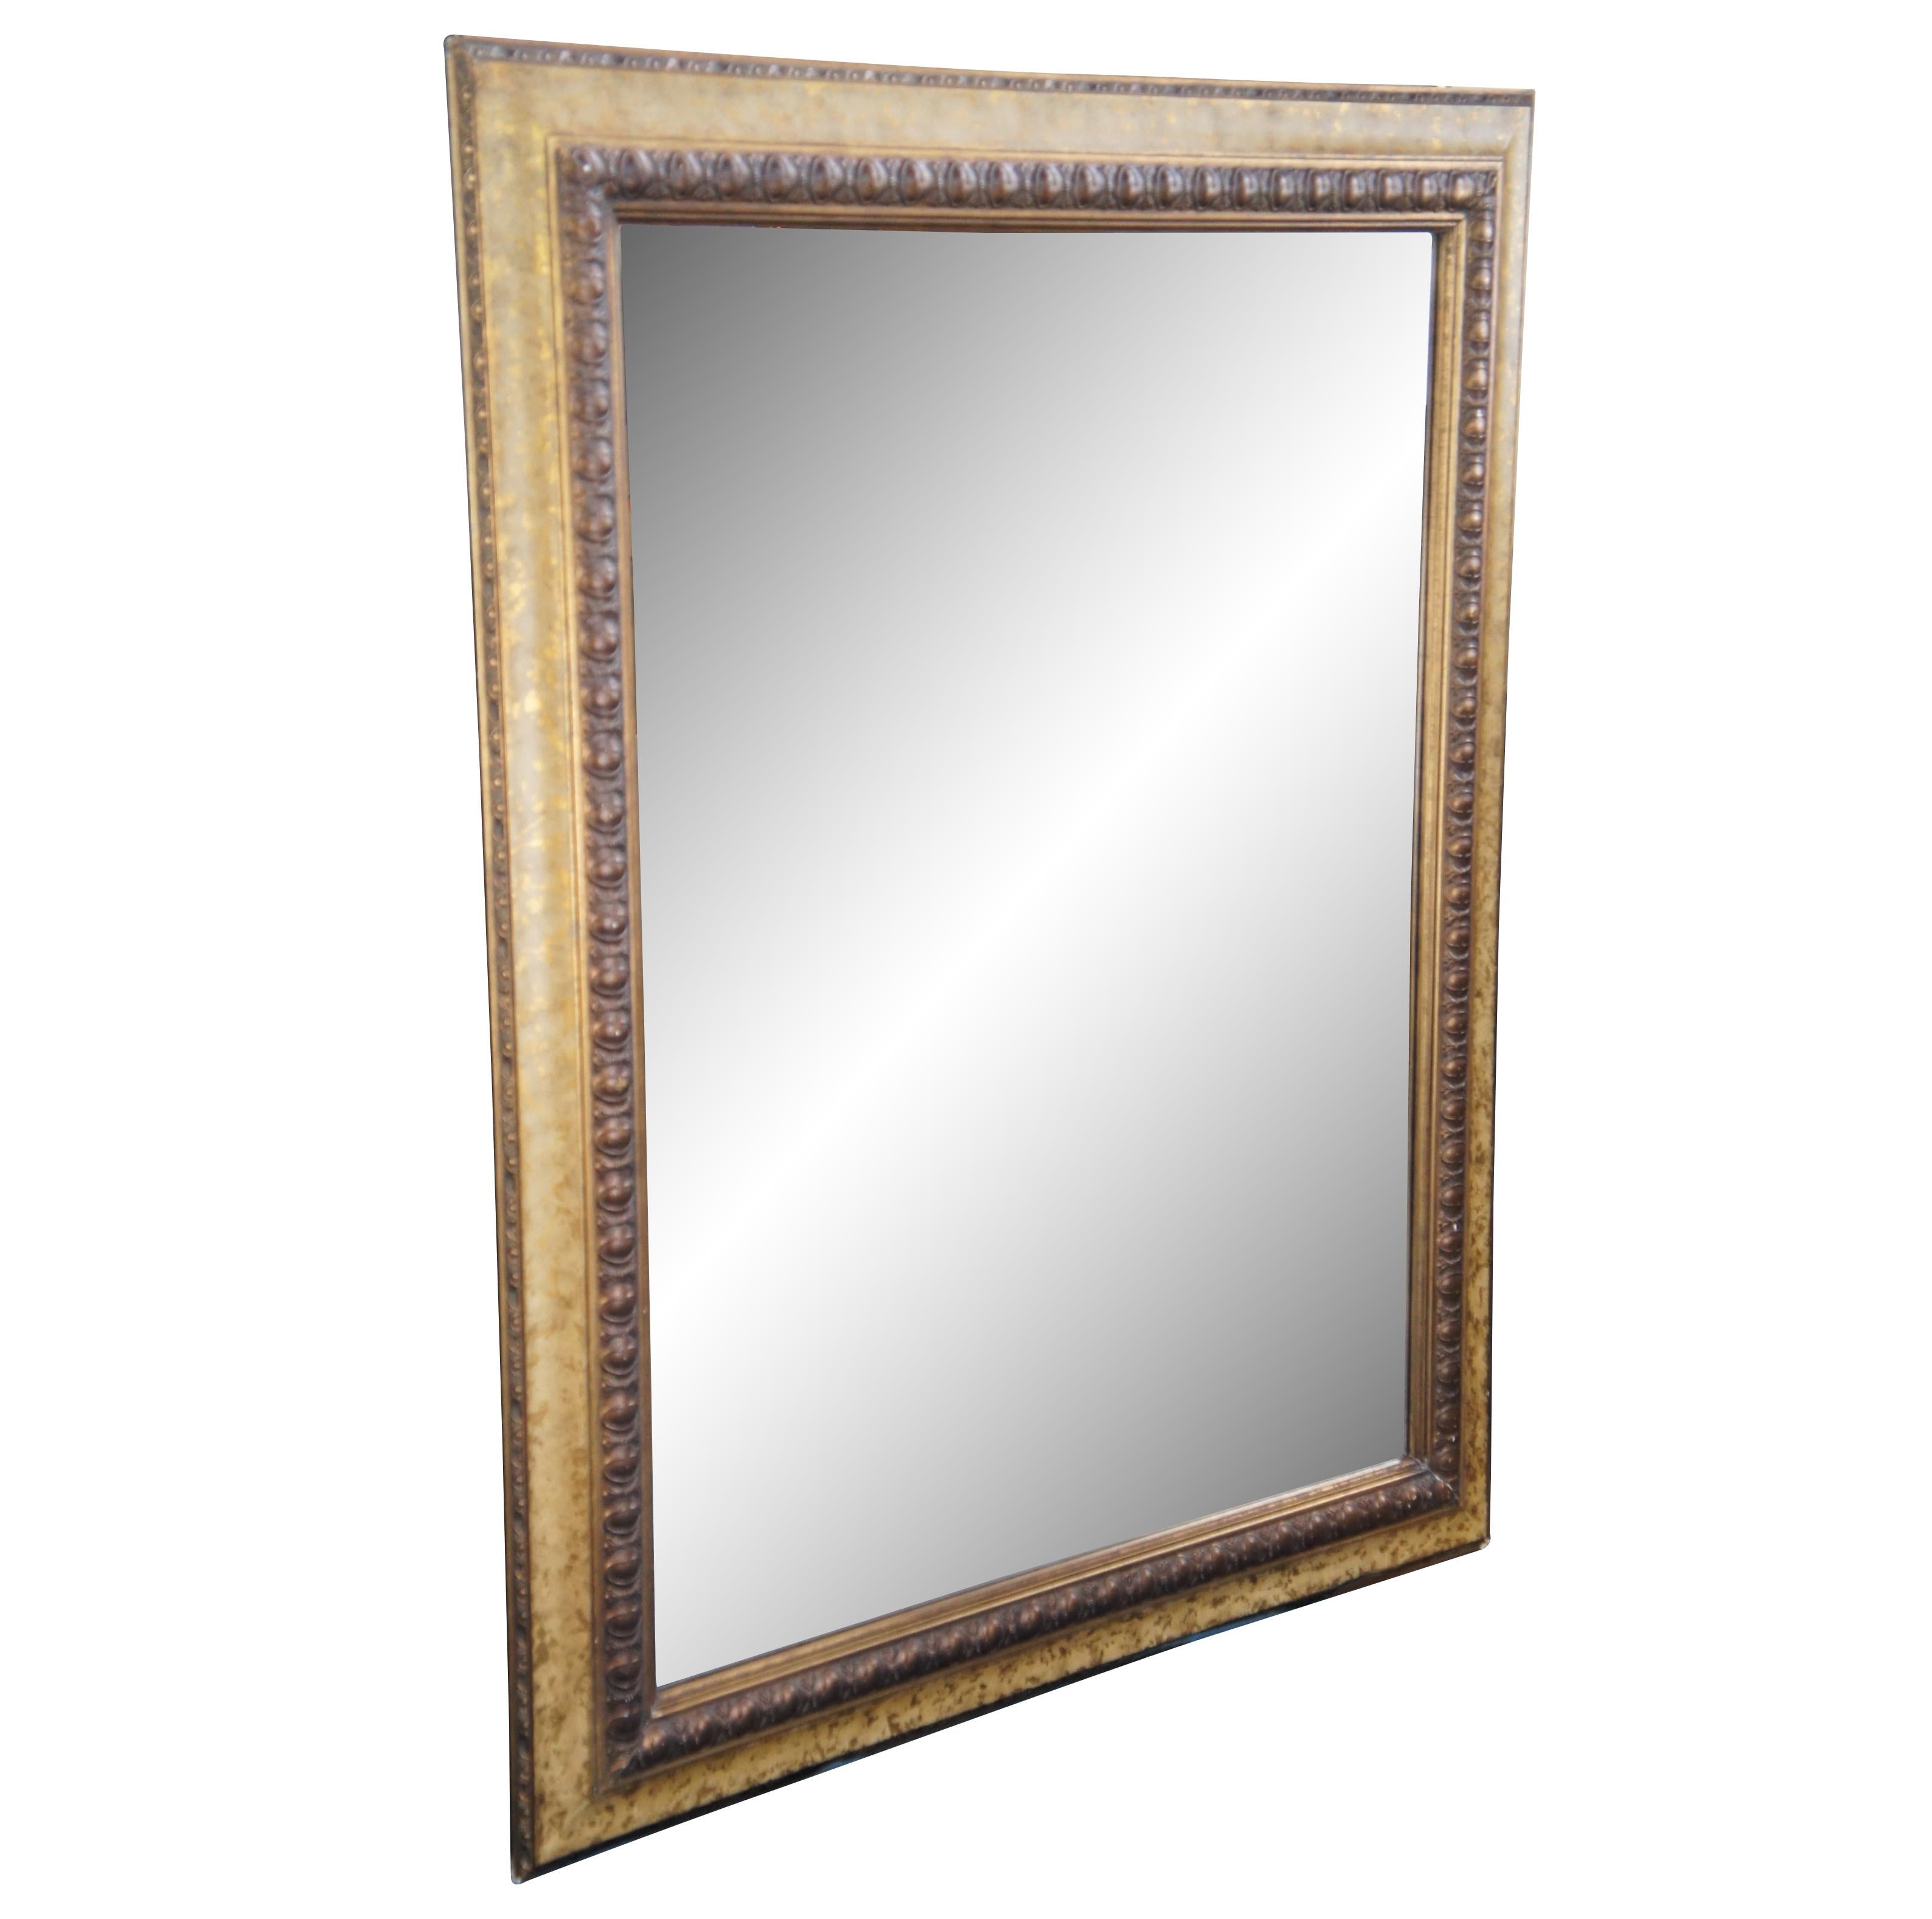 Large vintage beveled mirror featuring gold and baroque accents. Can hang both vertical and horizontal.